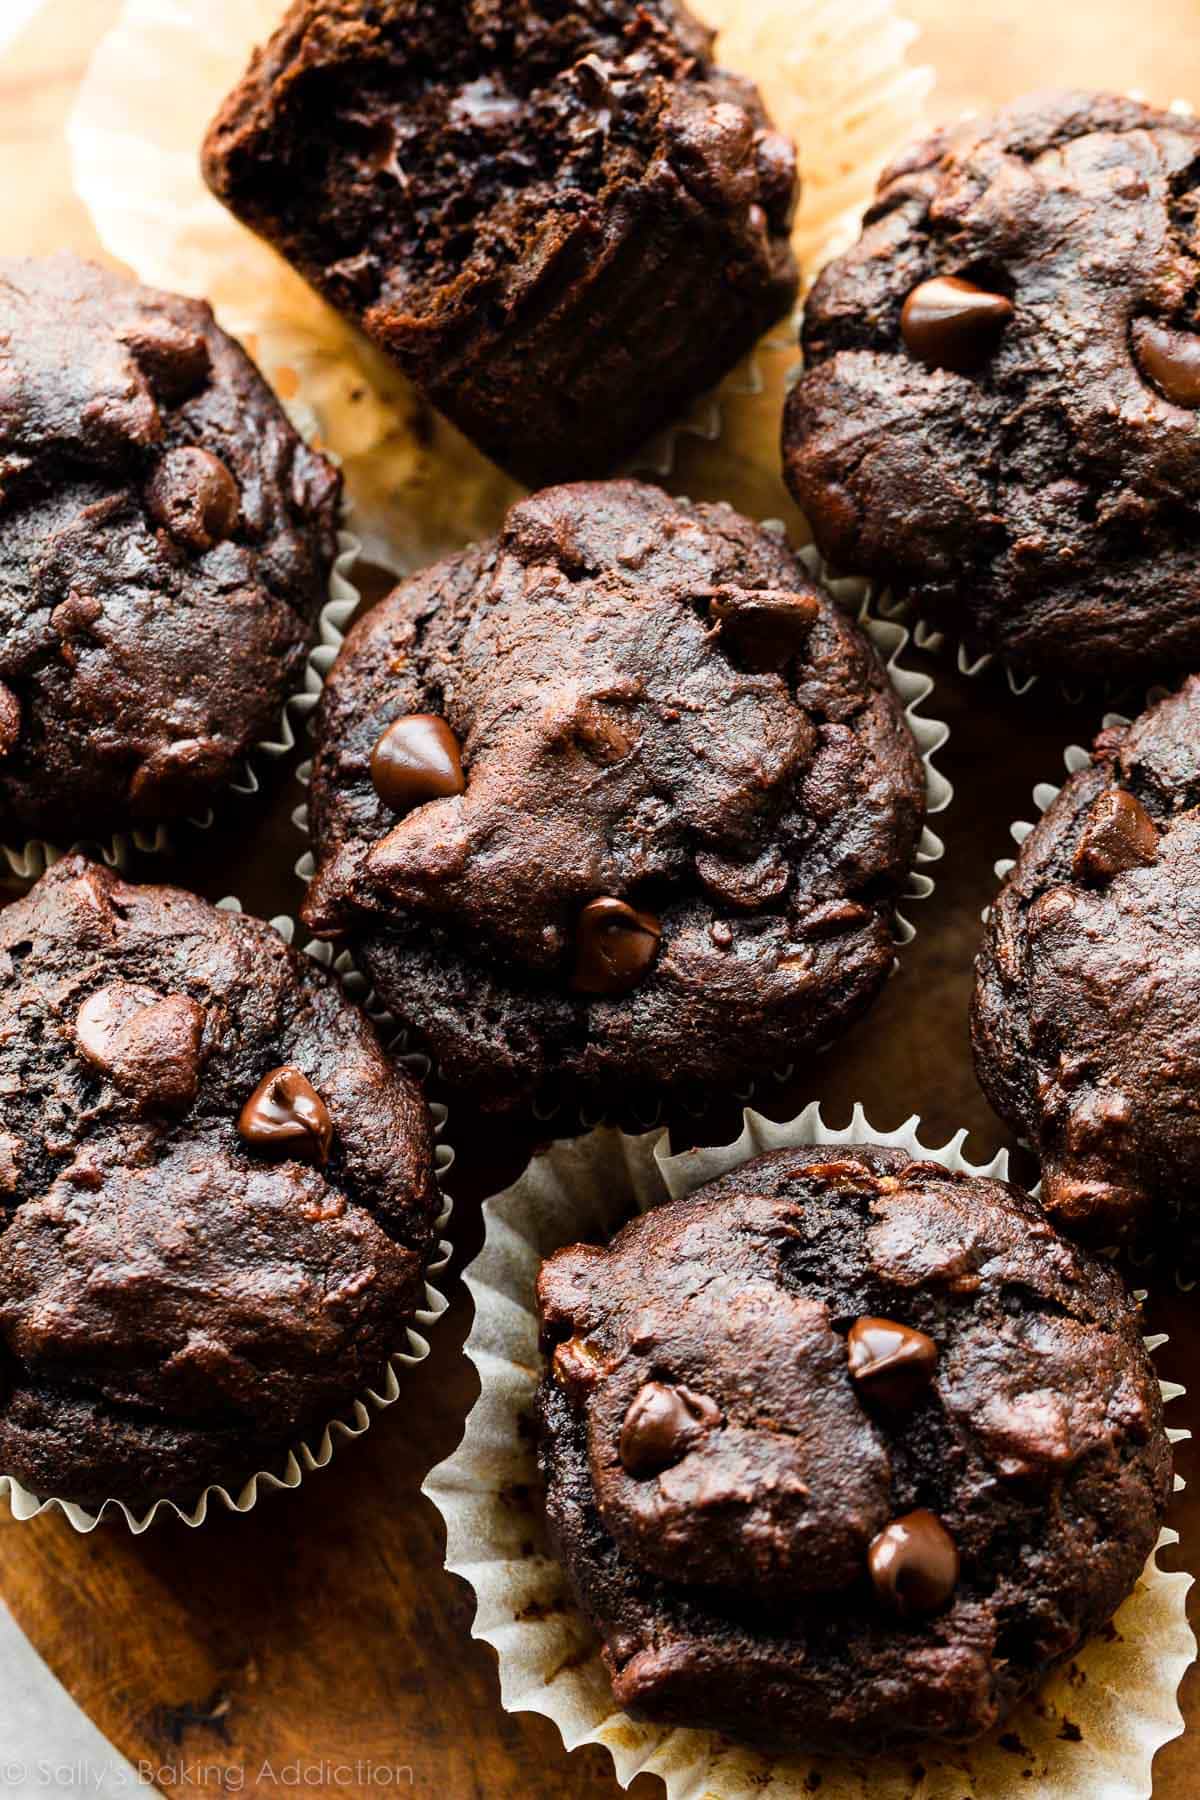 up close photo showing the tops of chocolate banana muffins on a wooden cutting board.